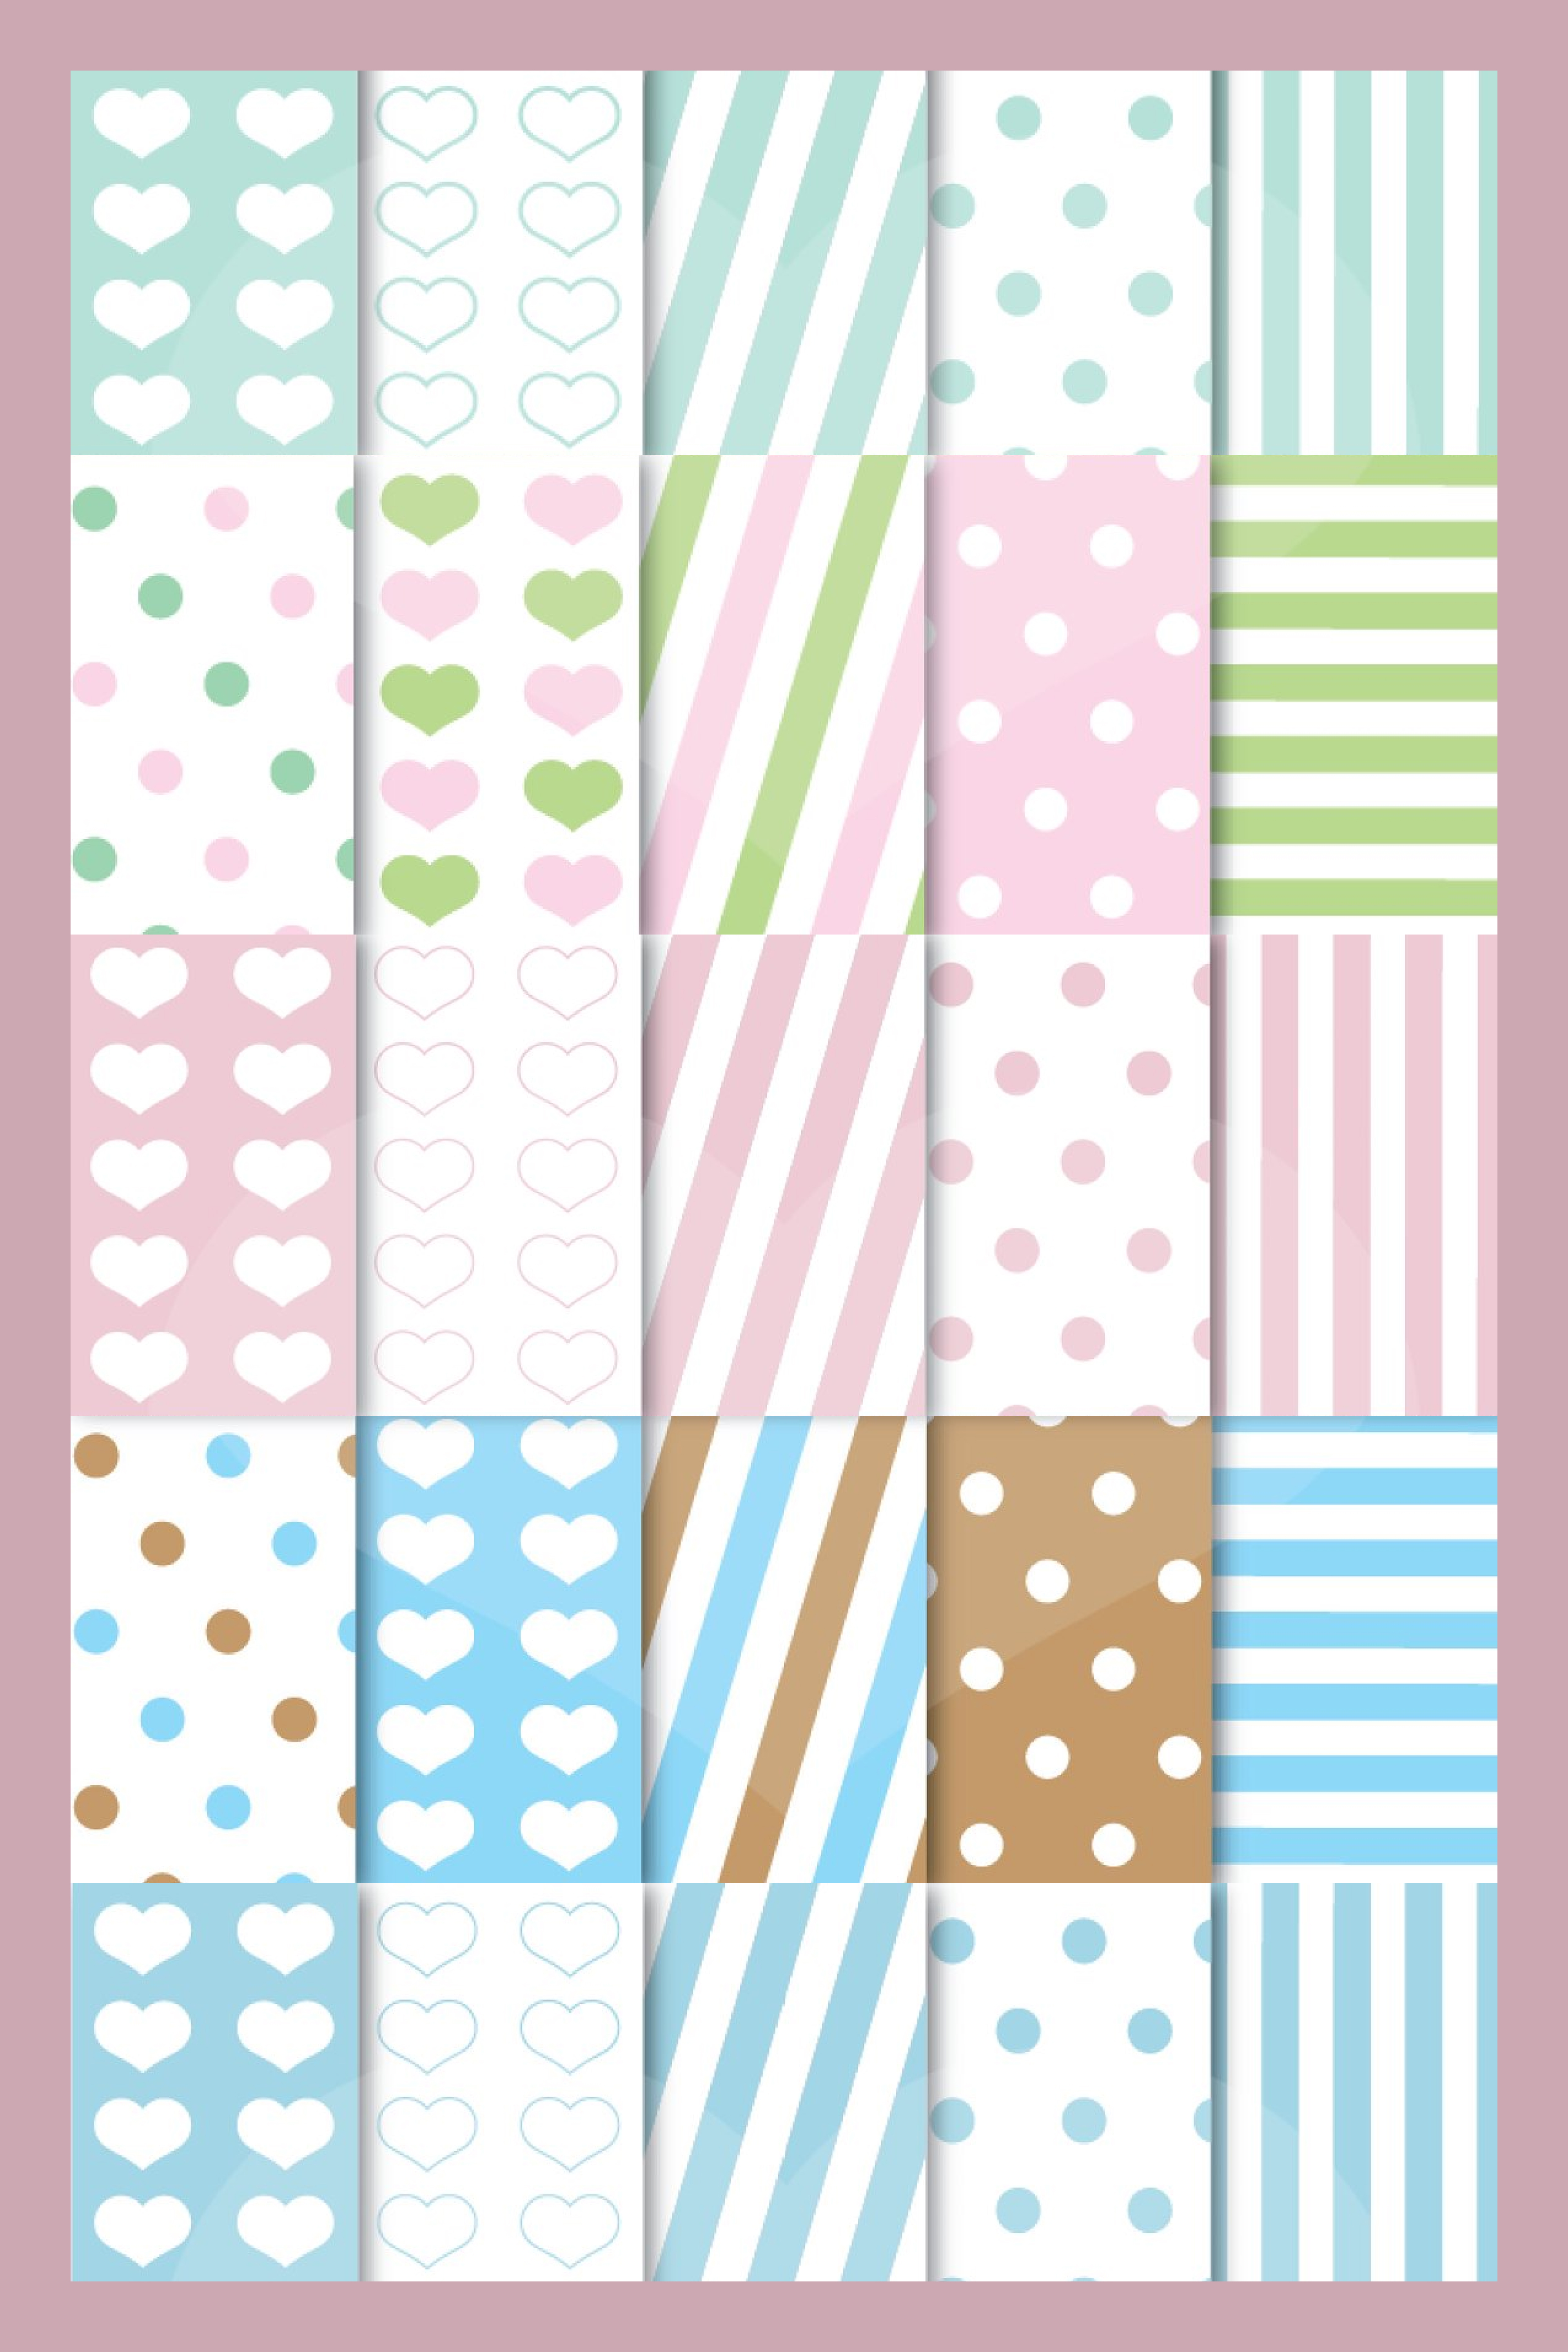 Collage of patterns for valentine's day.